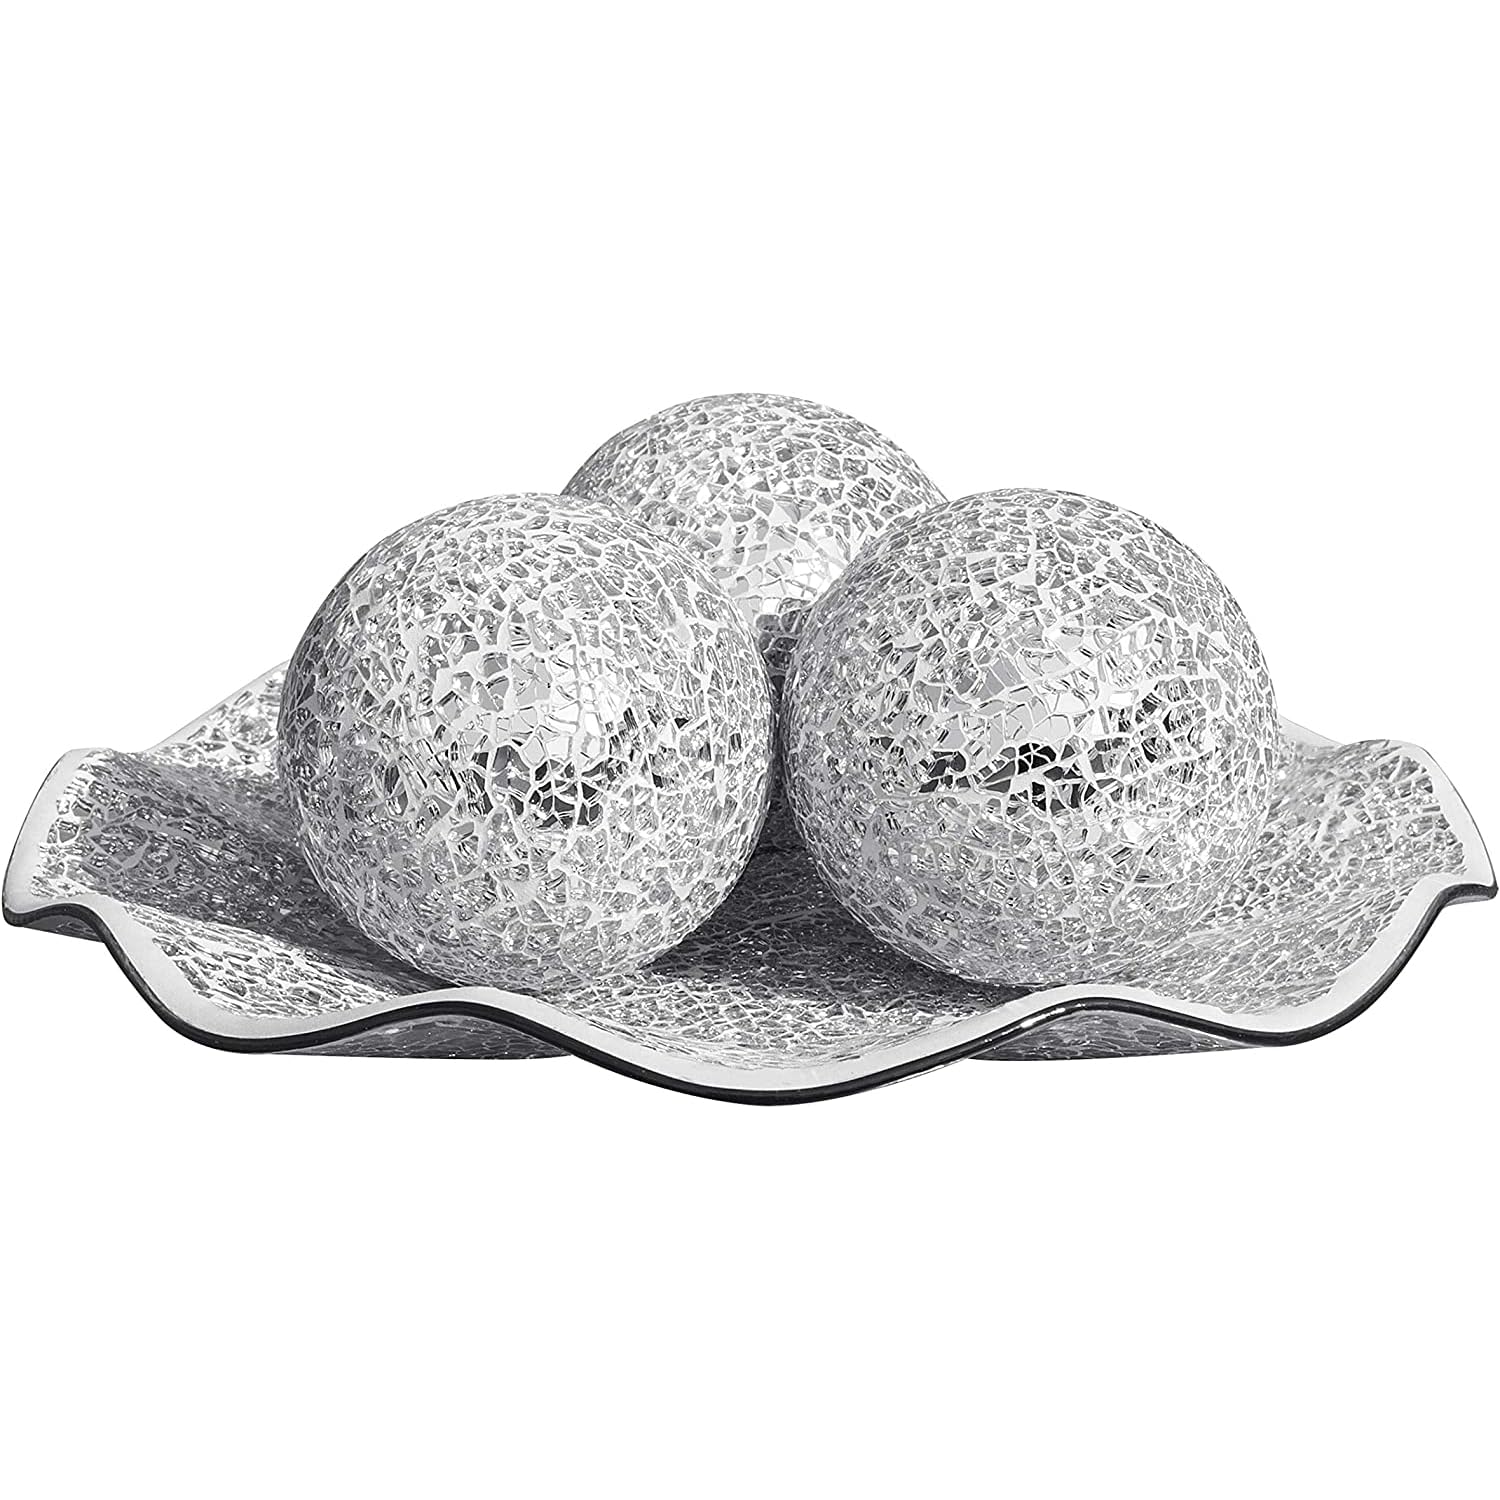 WHOLE HOUSEWARES | 11.5 Glass Mosaic Decorative Tray | Home Dcor Centerpiece | Bowl with 3PCS 3.75 Mosaic Decorative Balls | Table Centerpieces For Dining Room (Silver)